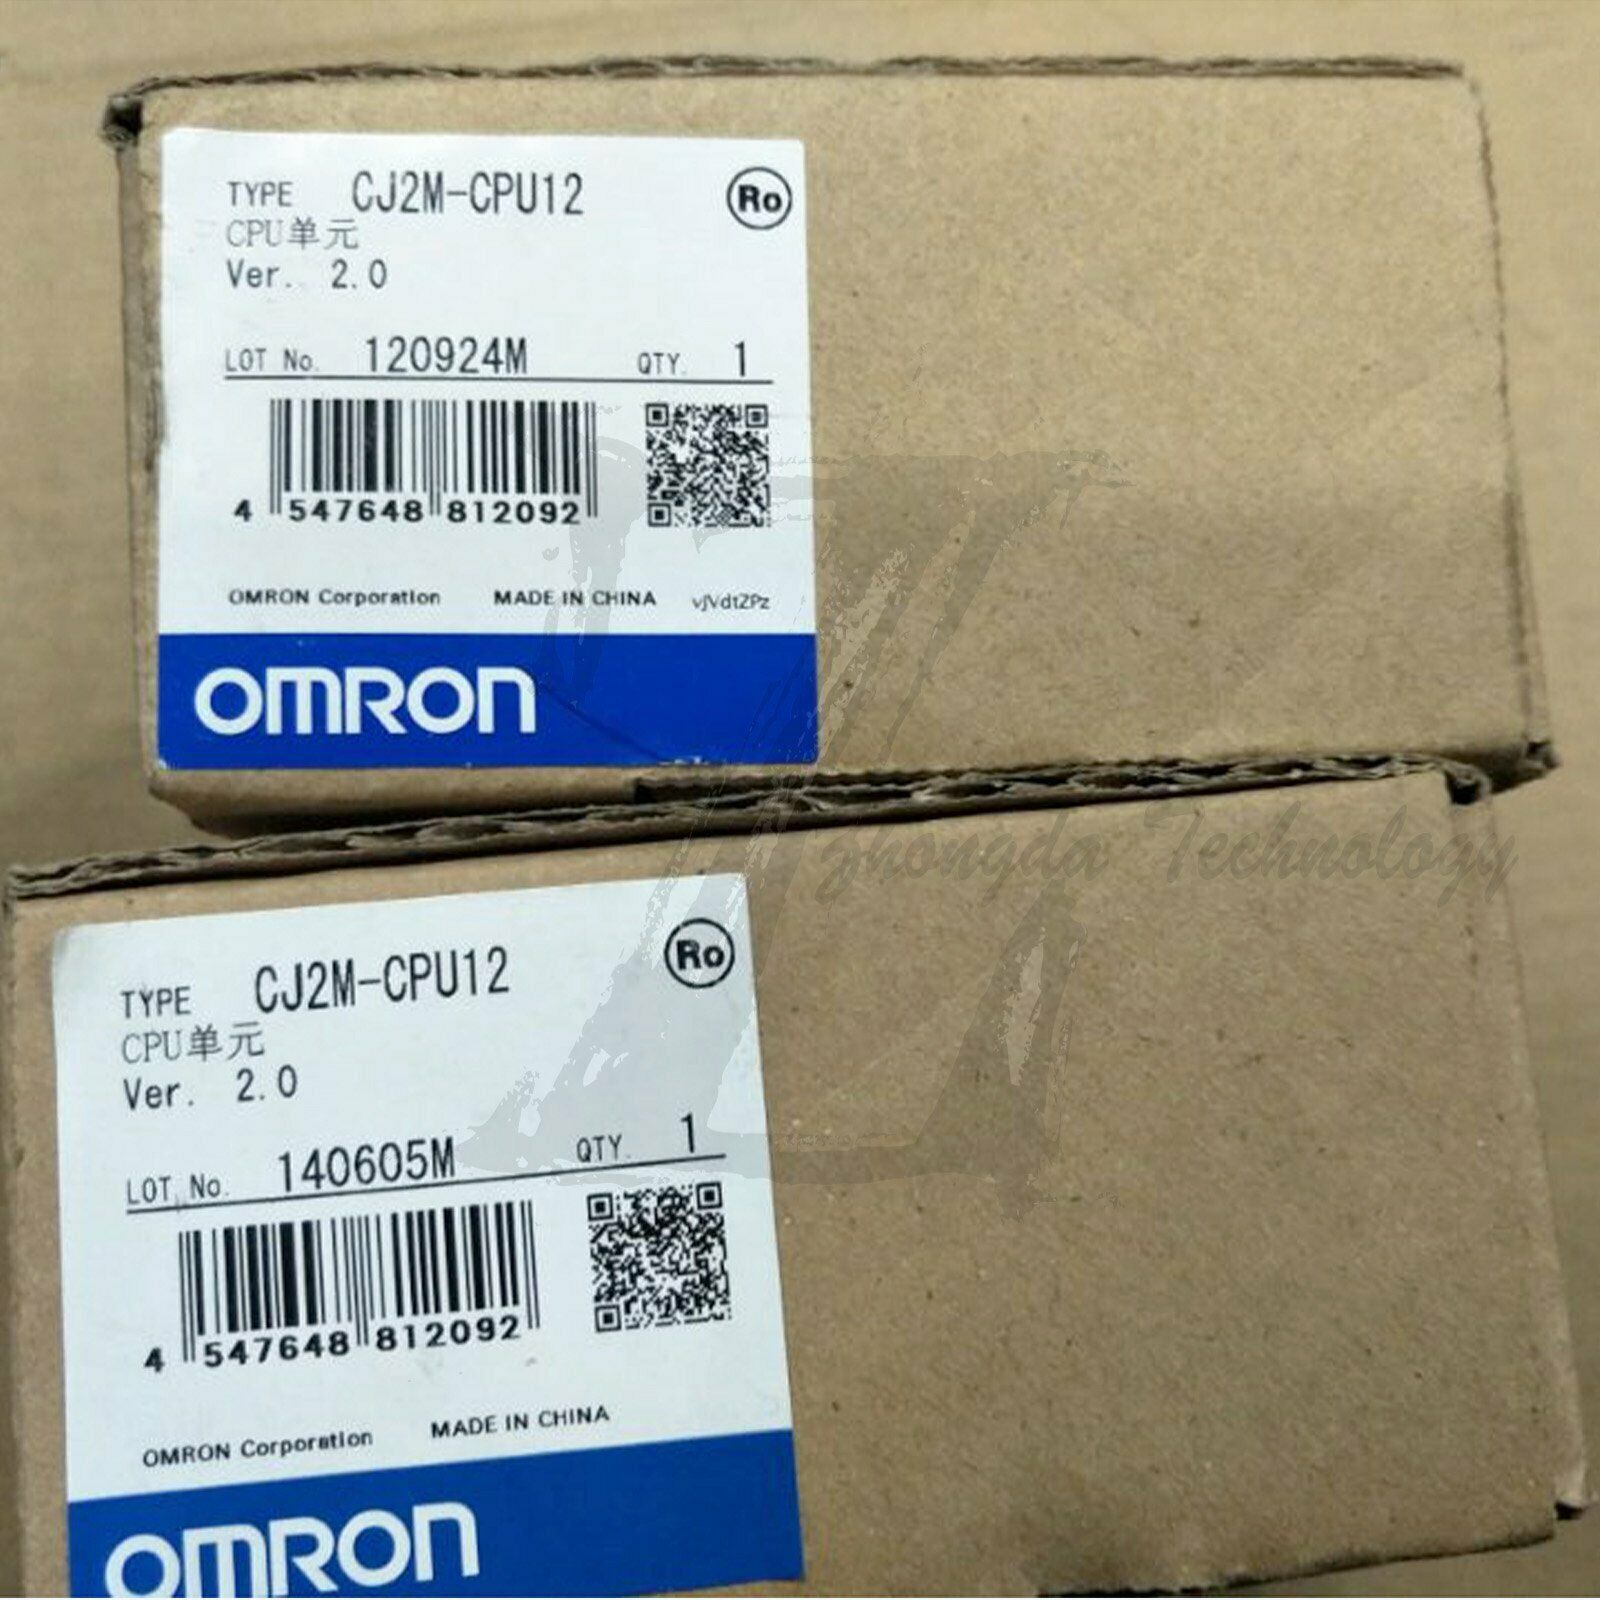 1pc new Omron CJ2M-CPU12 module side warranty KOEED 201-500, 80%, import_2020_10_10_031751, Omron, Other